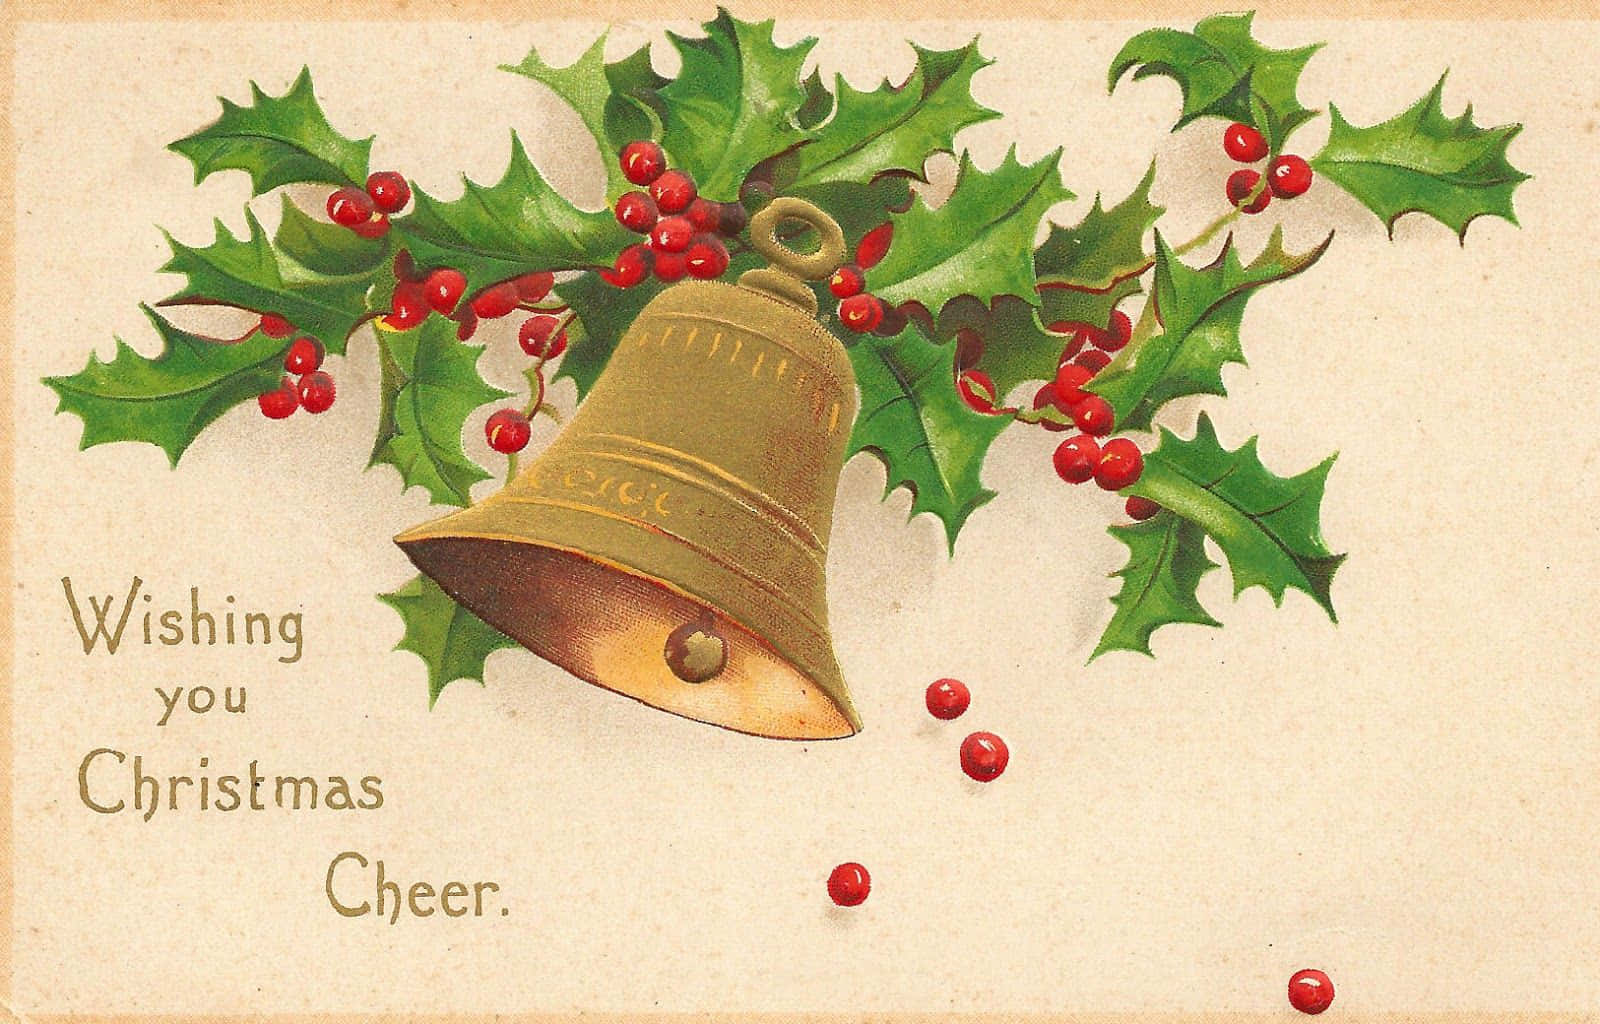 Celebrate the Holidays with a Vintage Christmas Desktop Wallpaper